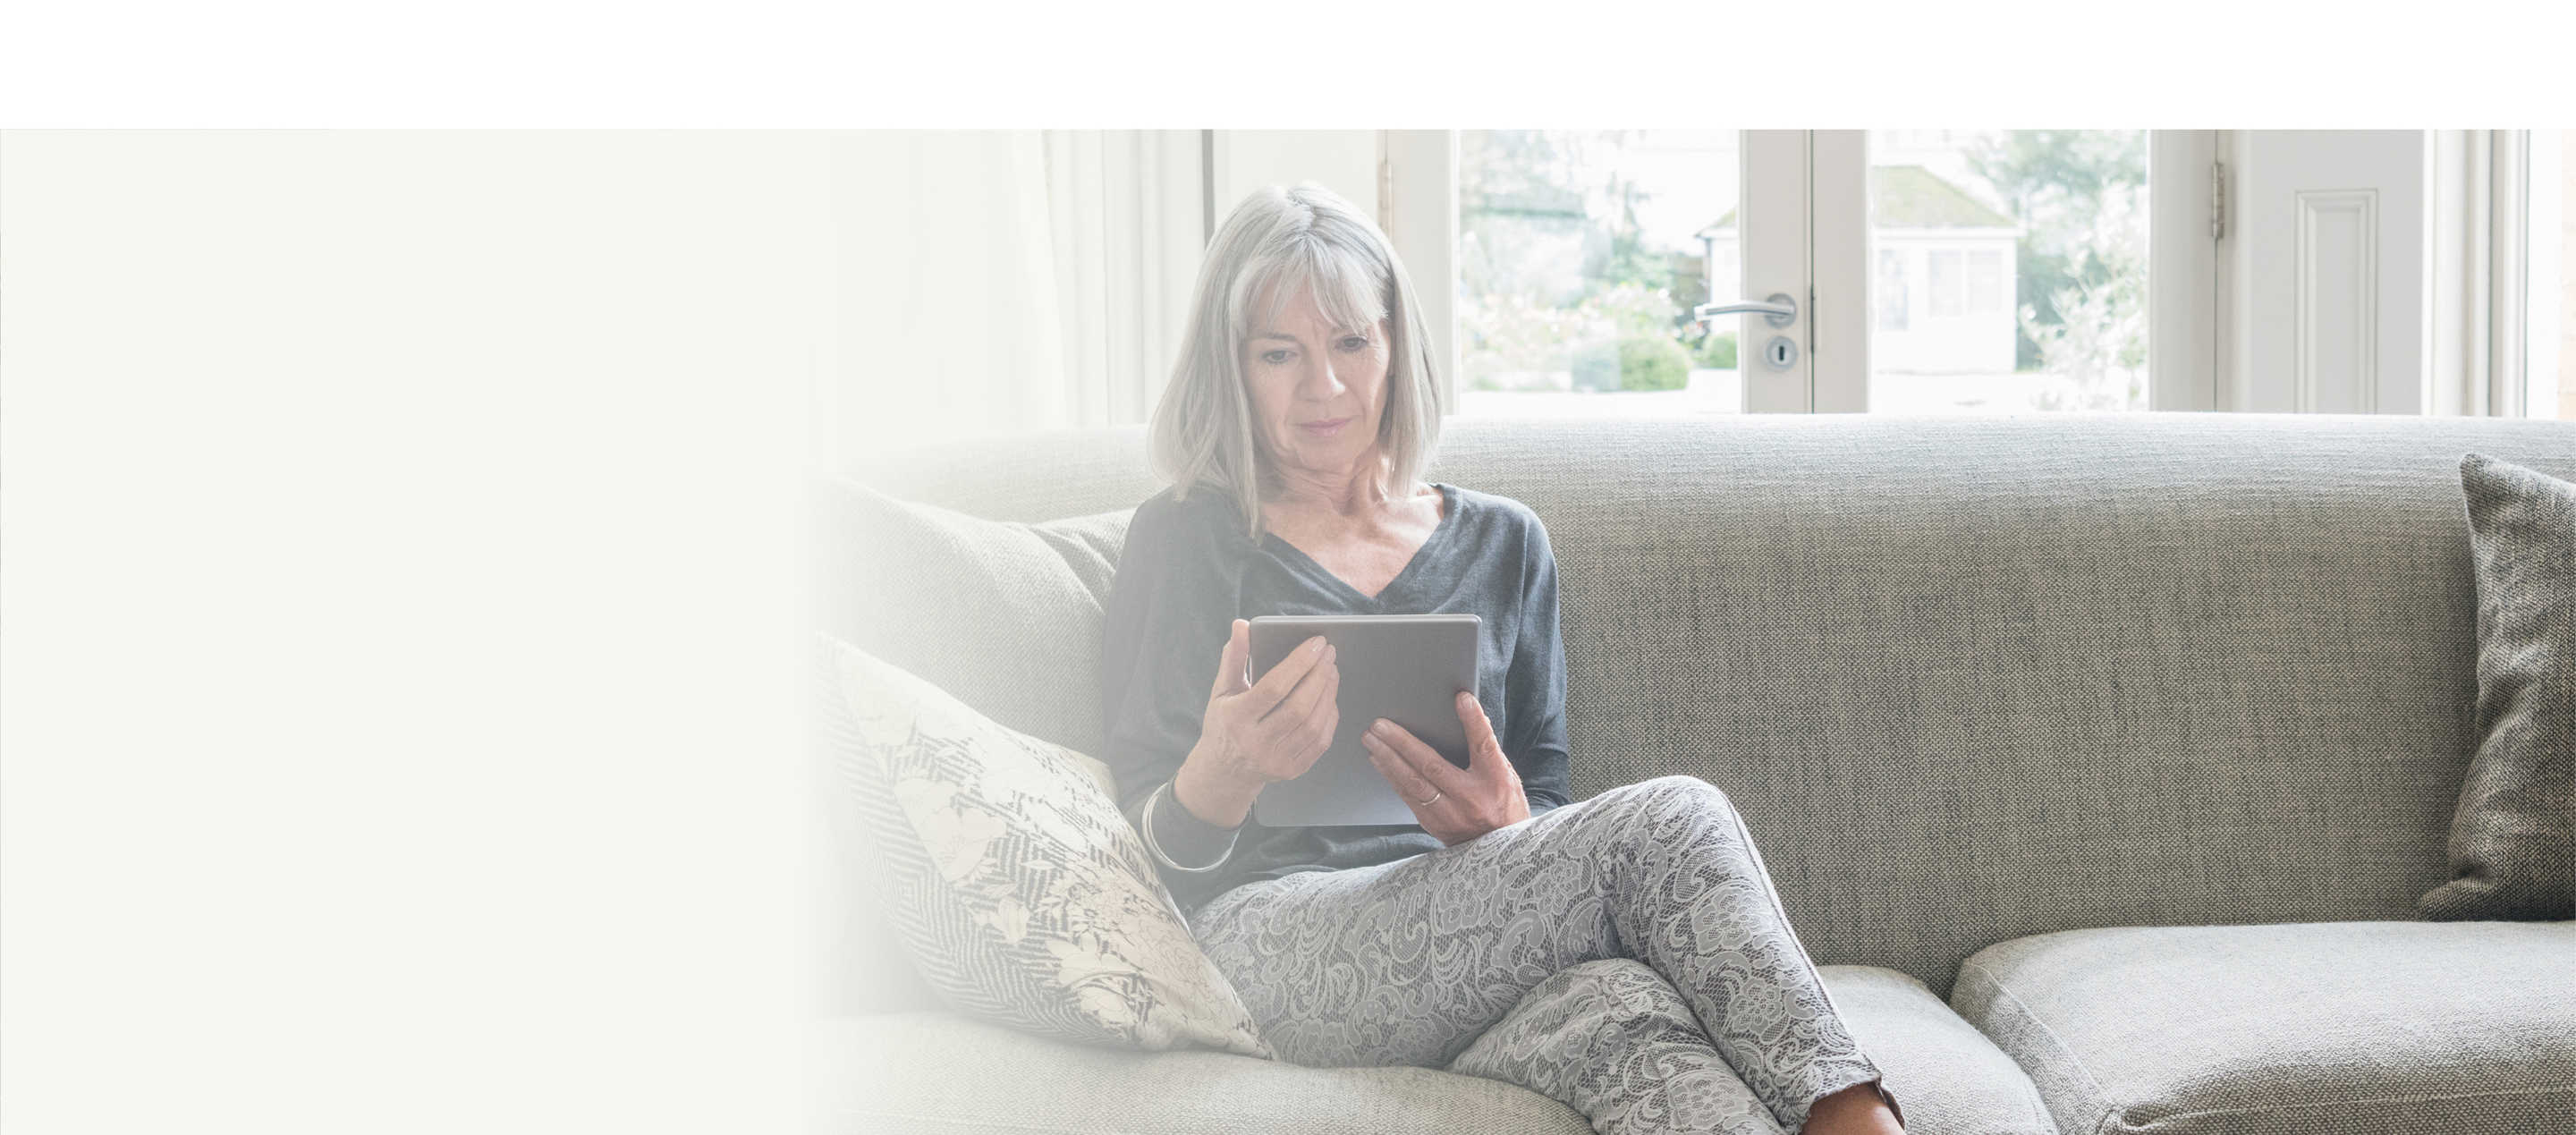 Resources hero, image showing a woman sitting on a sofa looking at a tablet